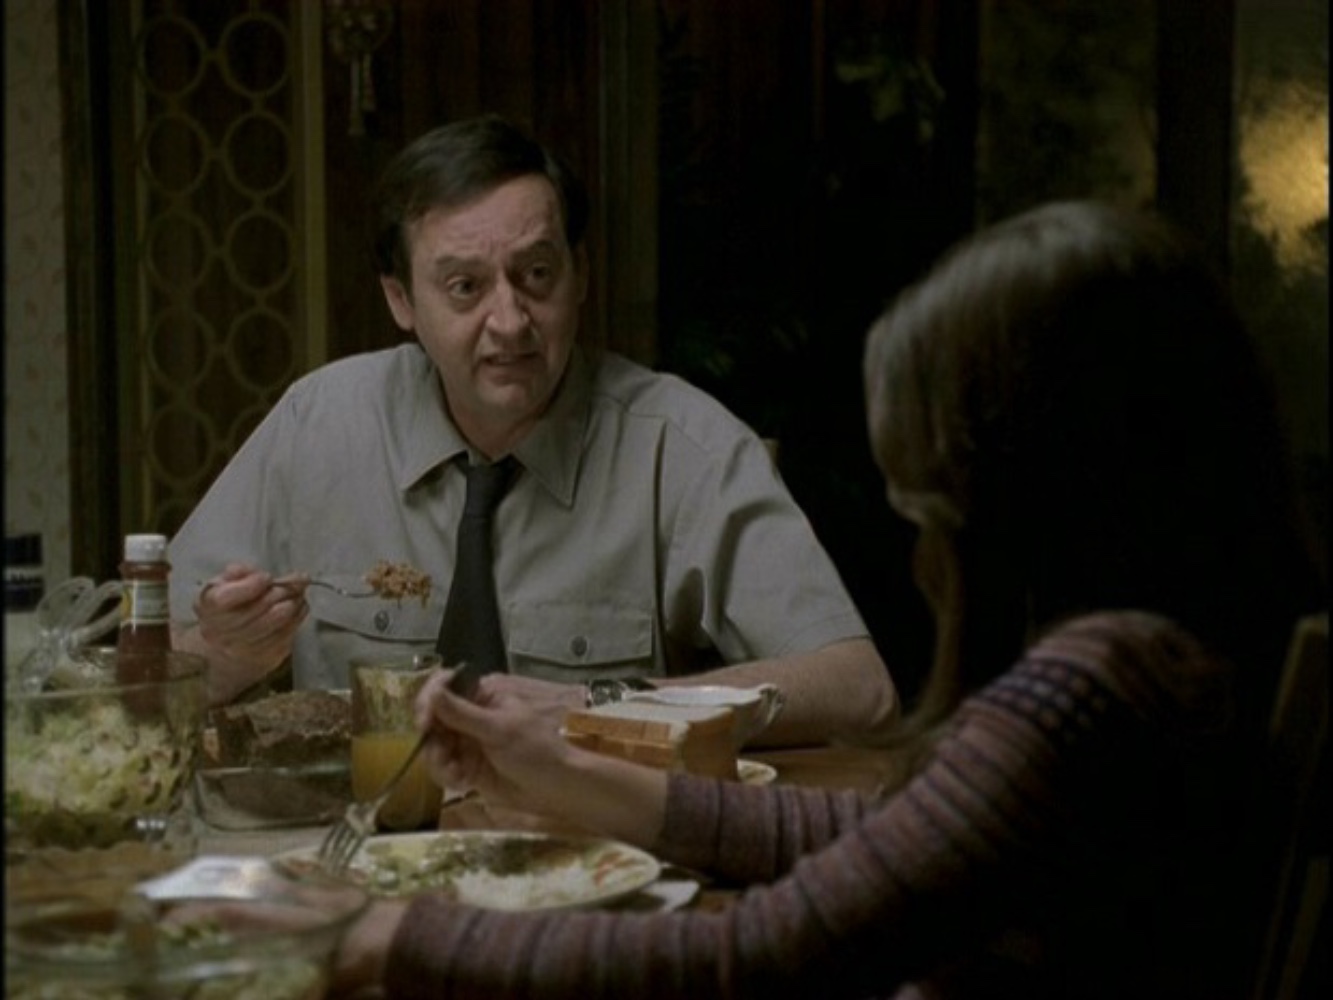 The Weirs having one of many onscreen family dinners, with Mr. Weir going on one of his infamous rants.